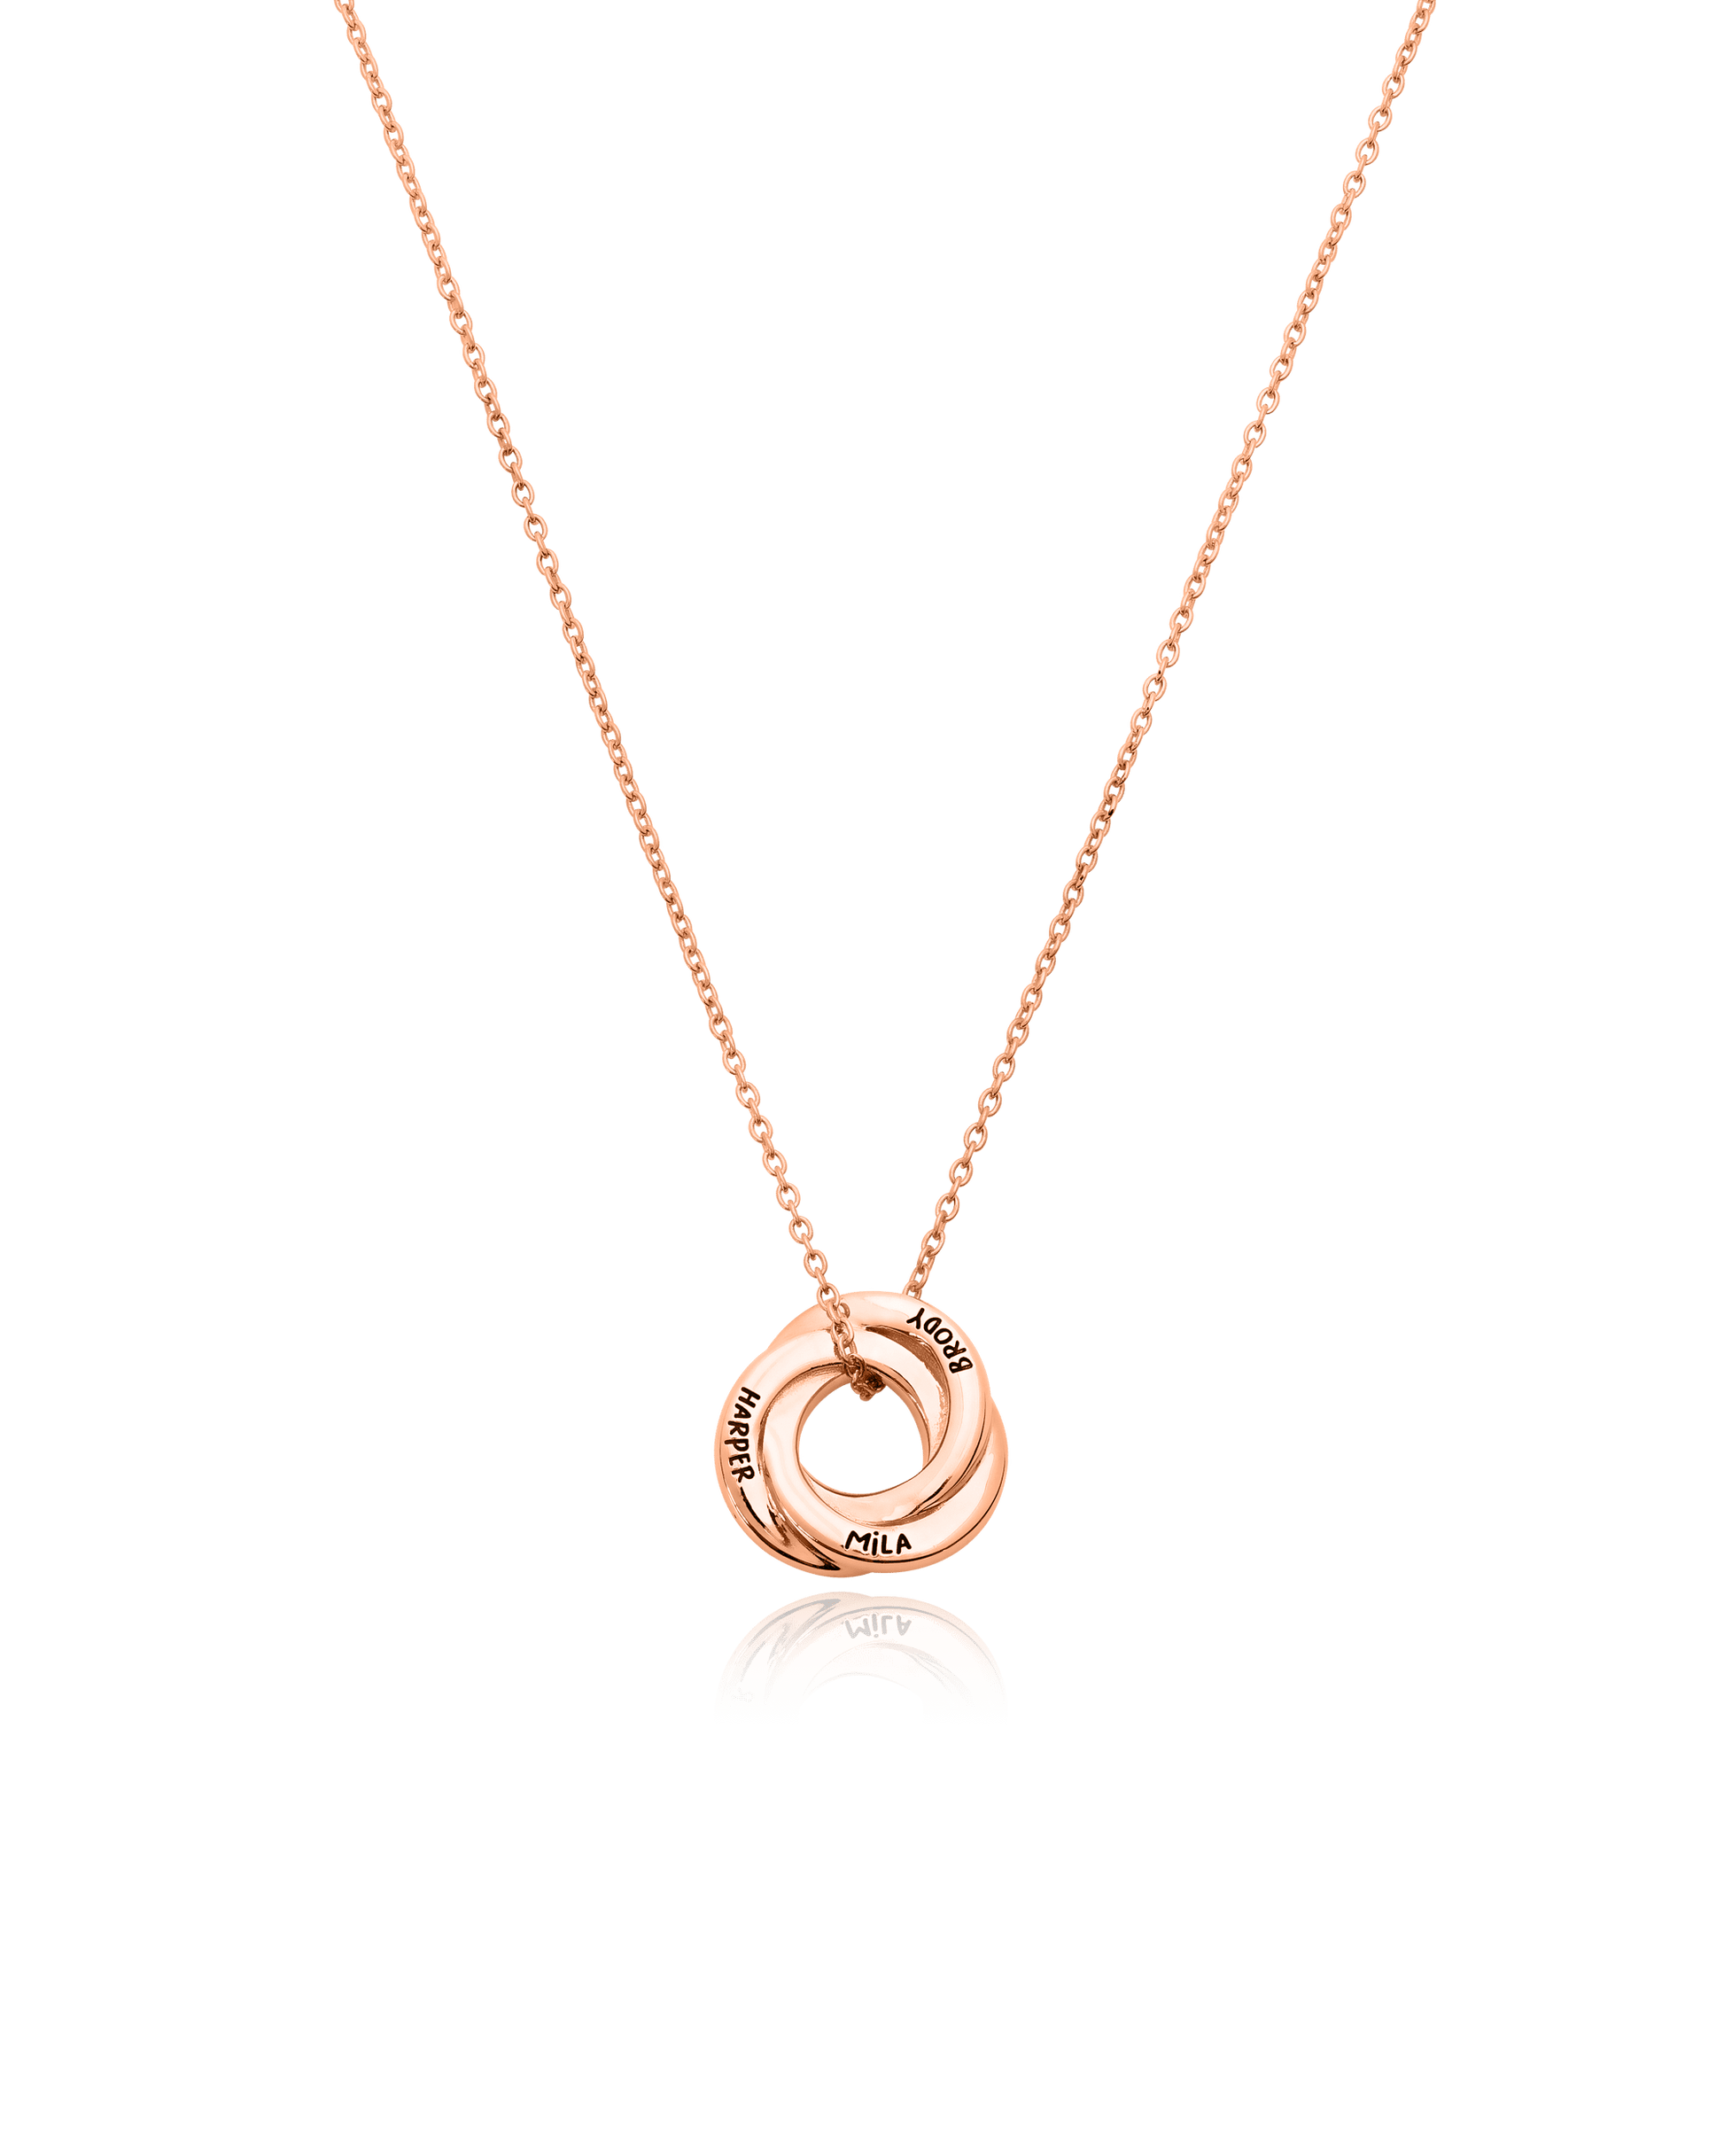 Russian Ring Necklace - 18K Gold Vermeil Necklaces magal-dev 